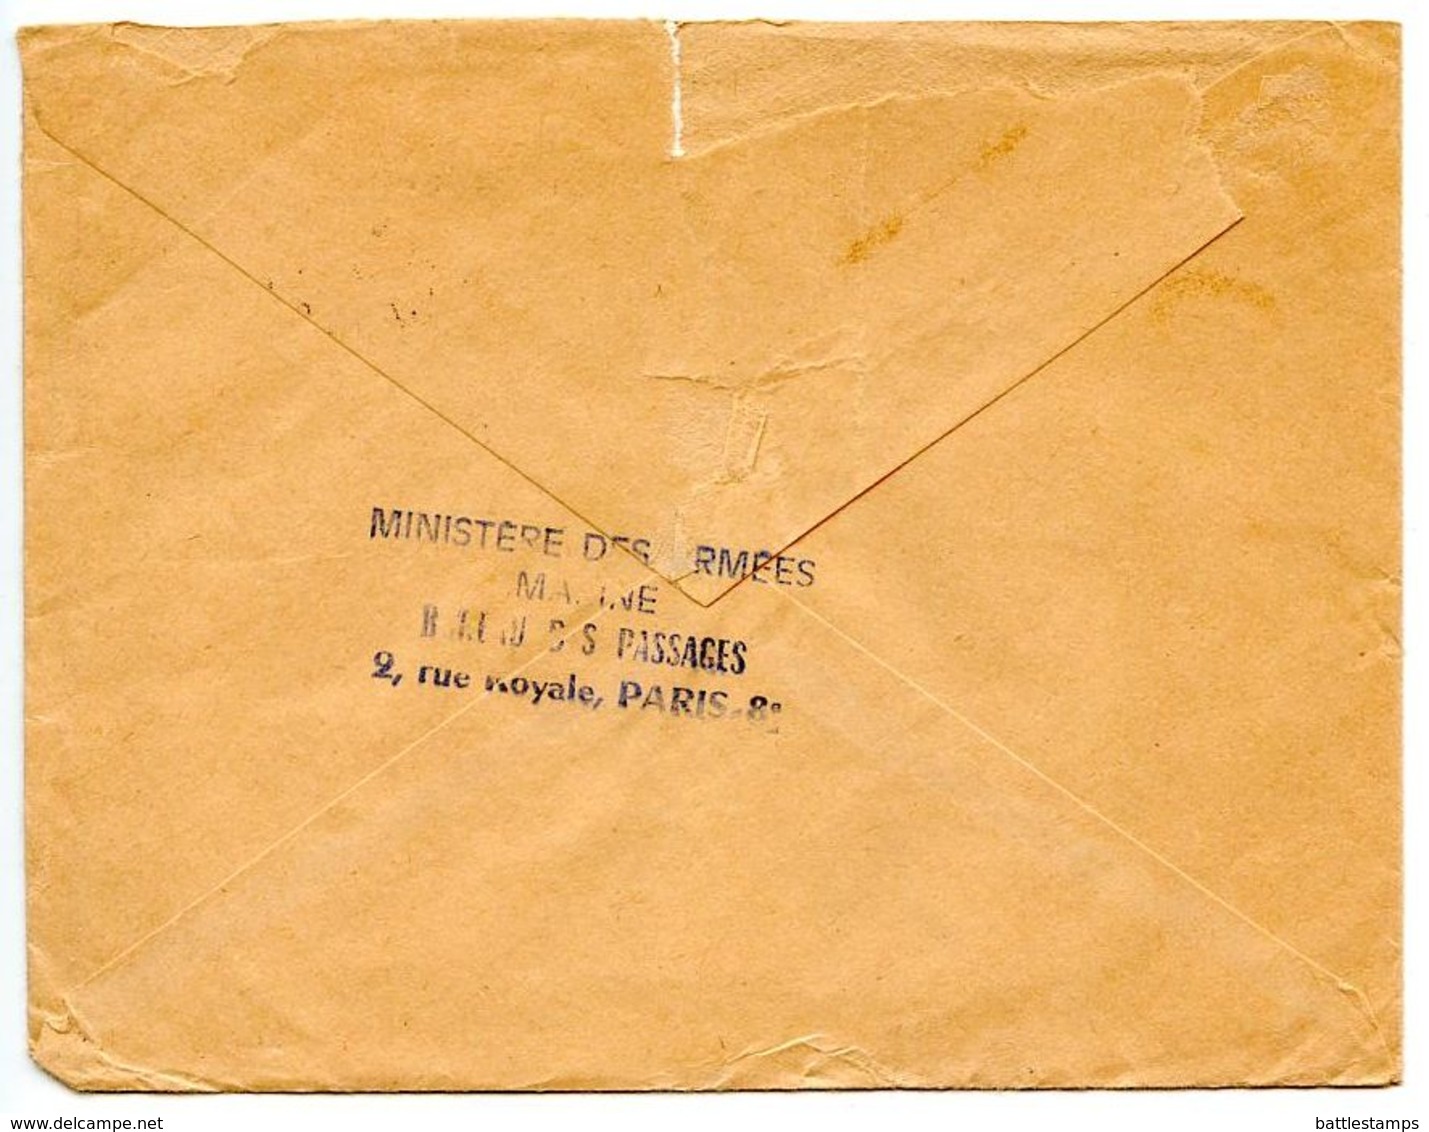 France 1970 Military Cover Paris Naval - Ministere Des Armees - Naval Post